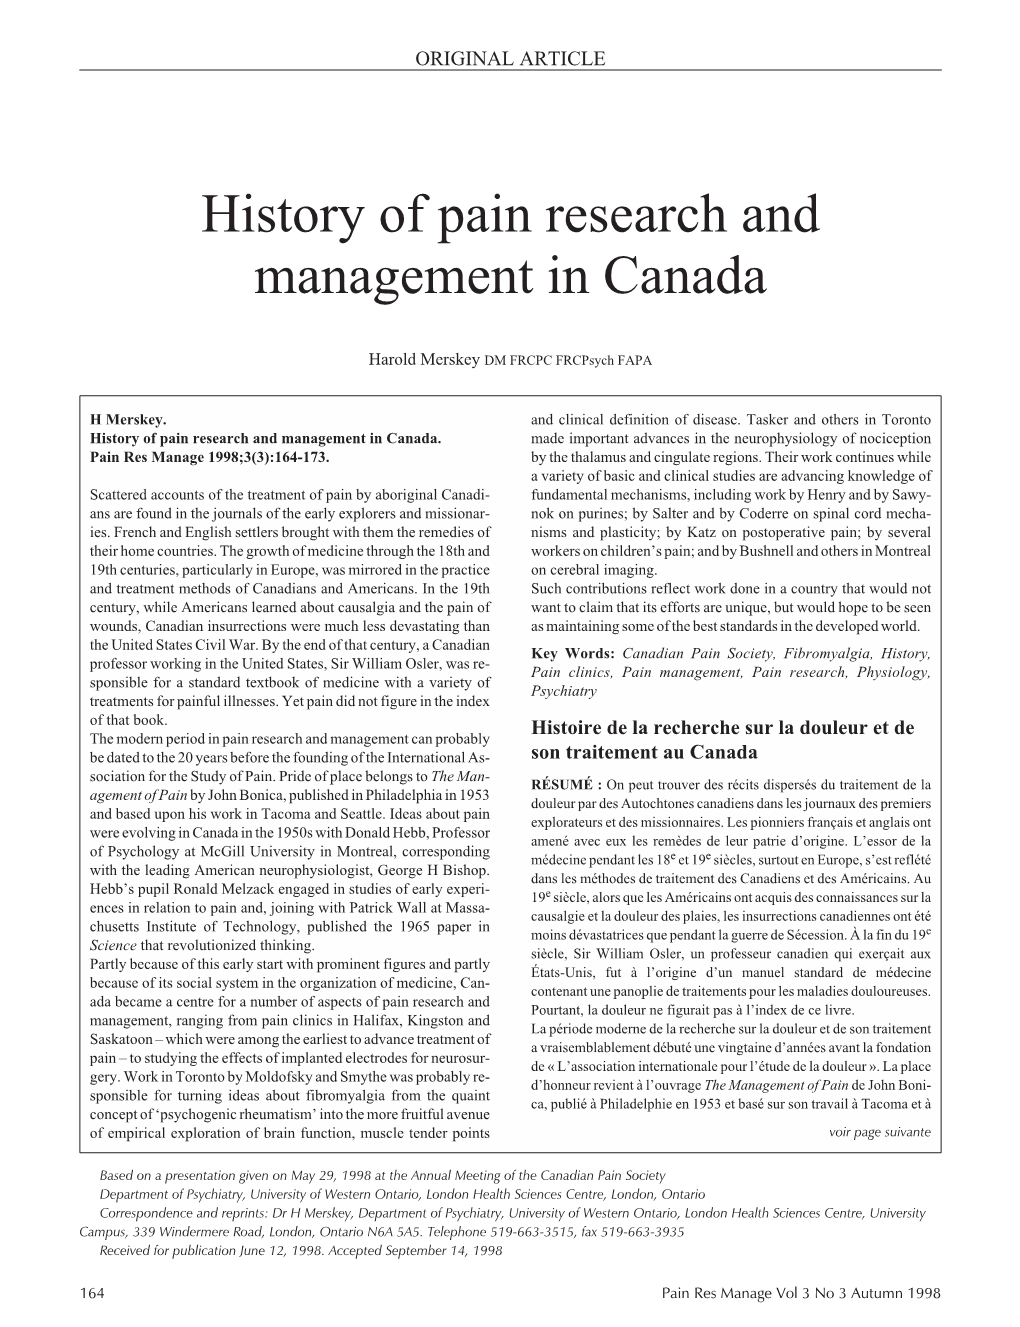 History of Pain Research and Management in Canada